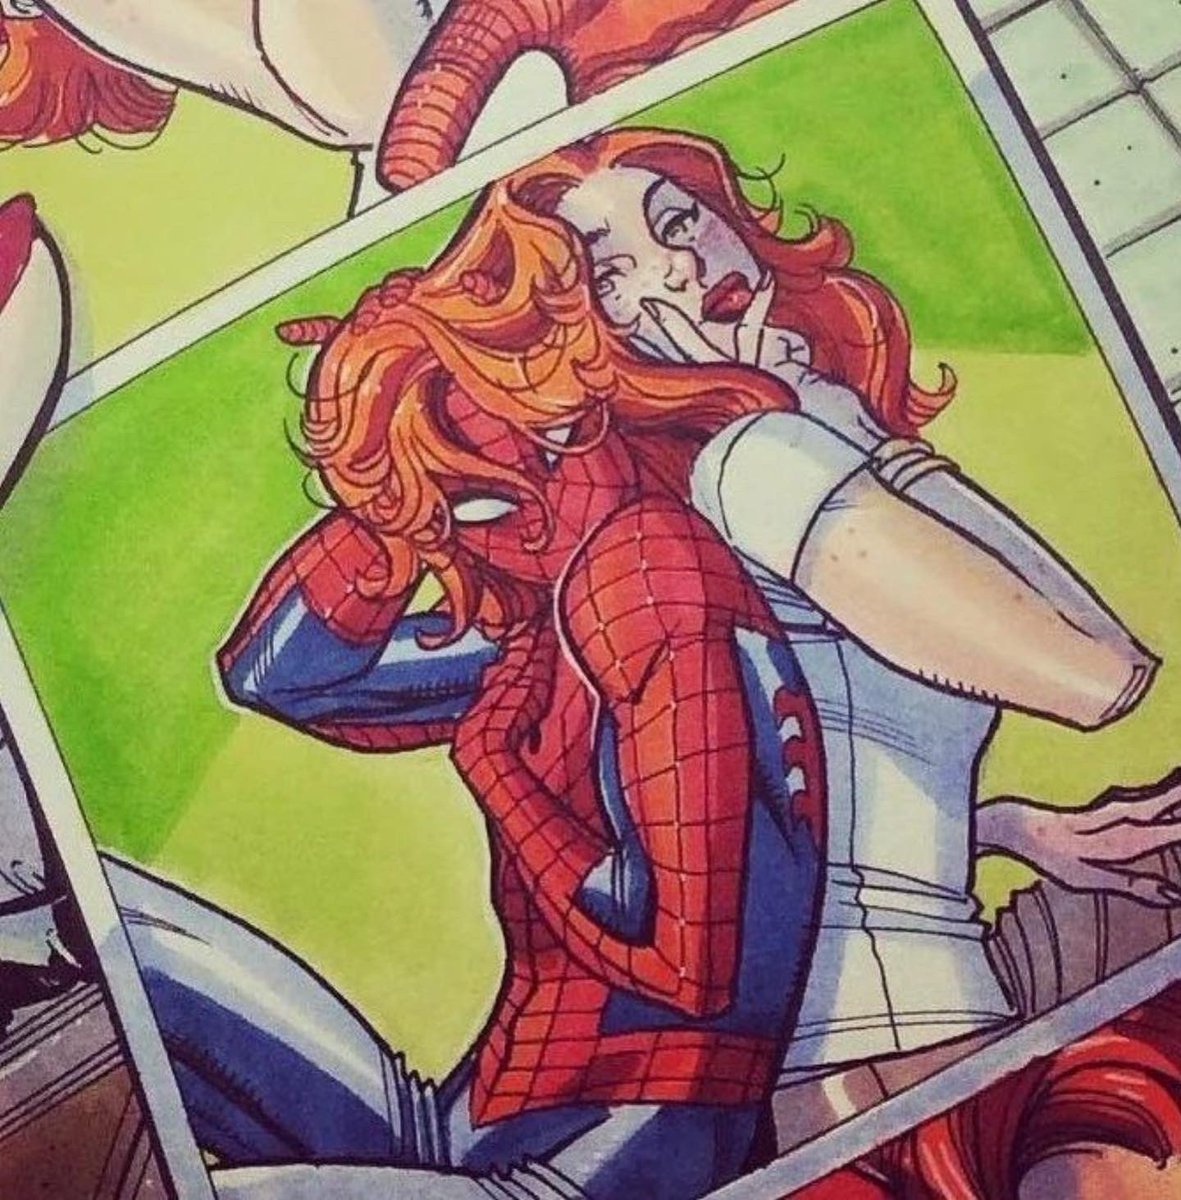 RT @ReignOfPride: Modern Spider-Man comics will never have MJ and Peter be happy together like this anymore https://t.co/NL4eTDRpi9